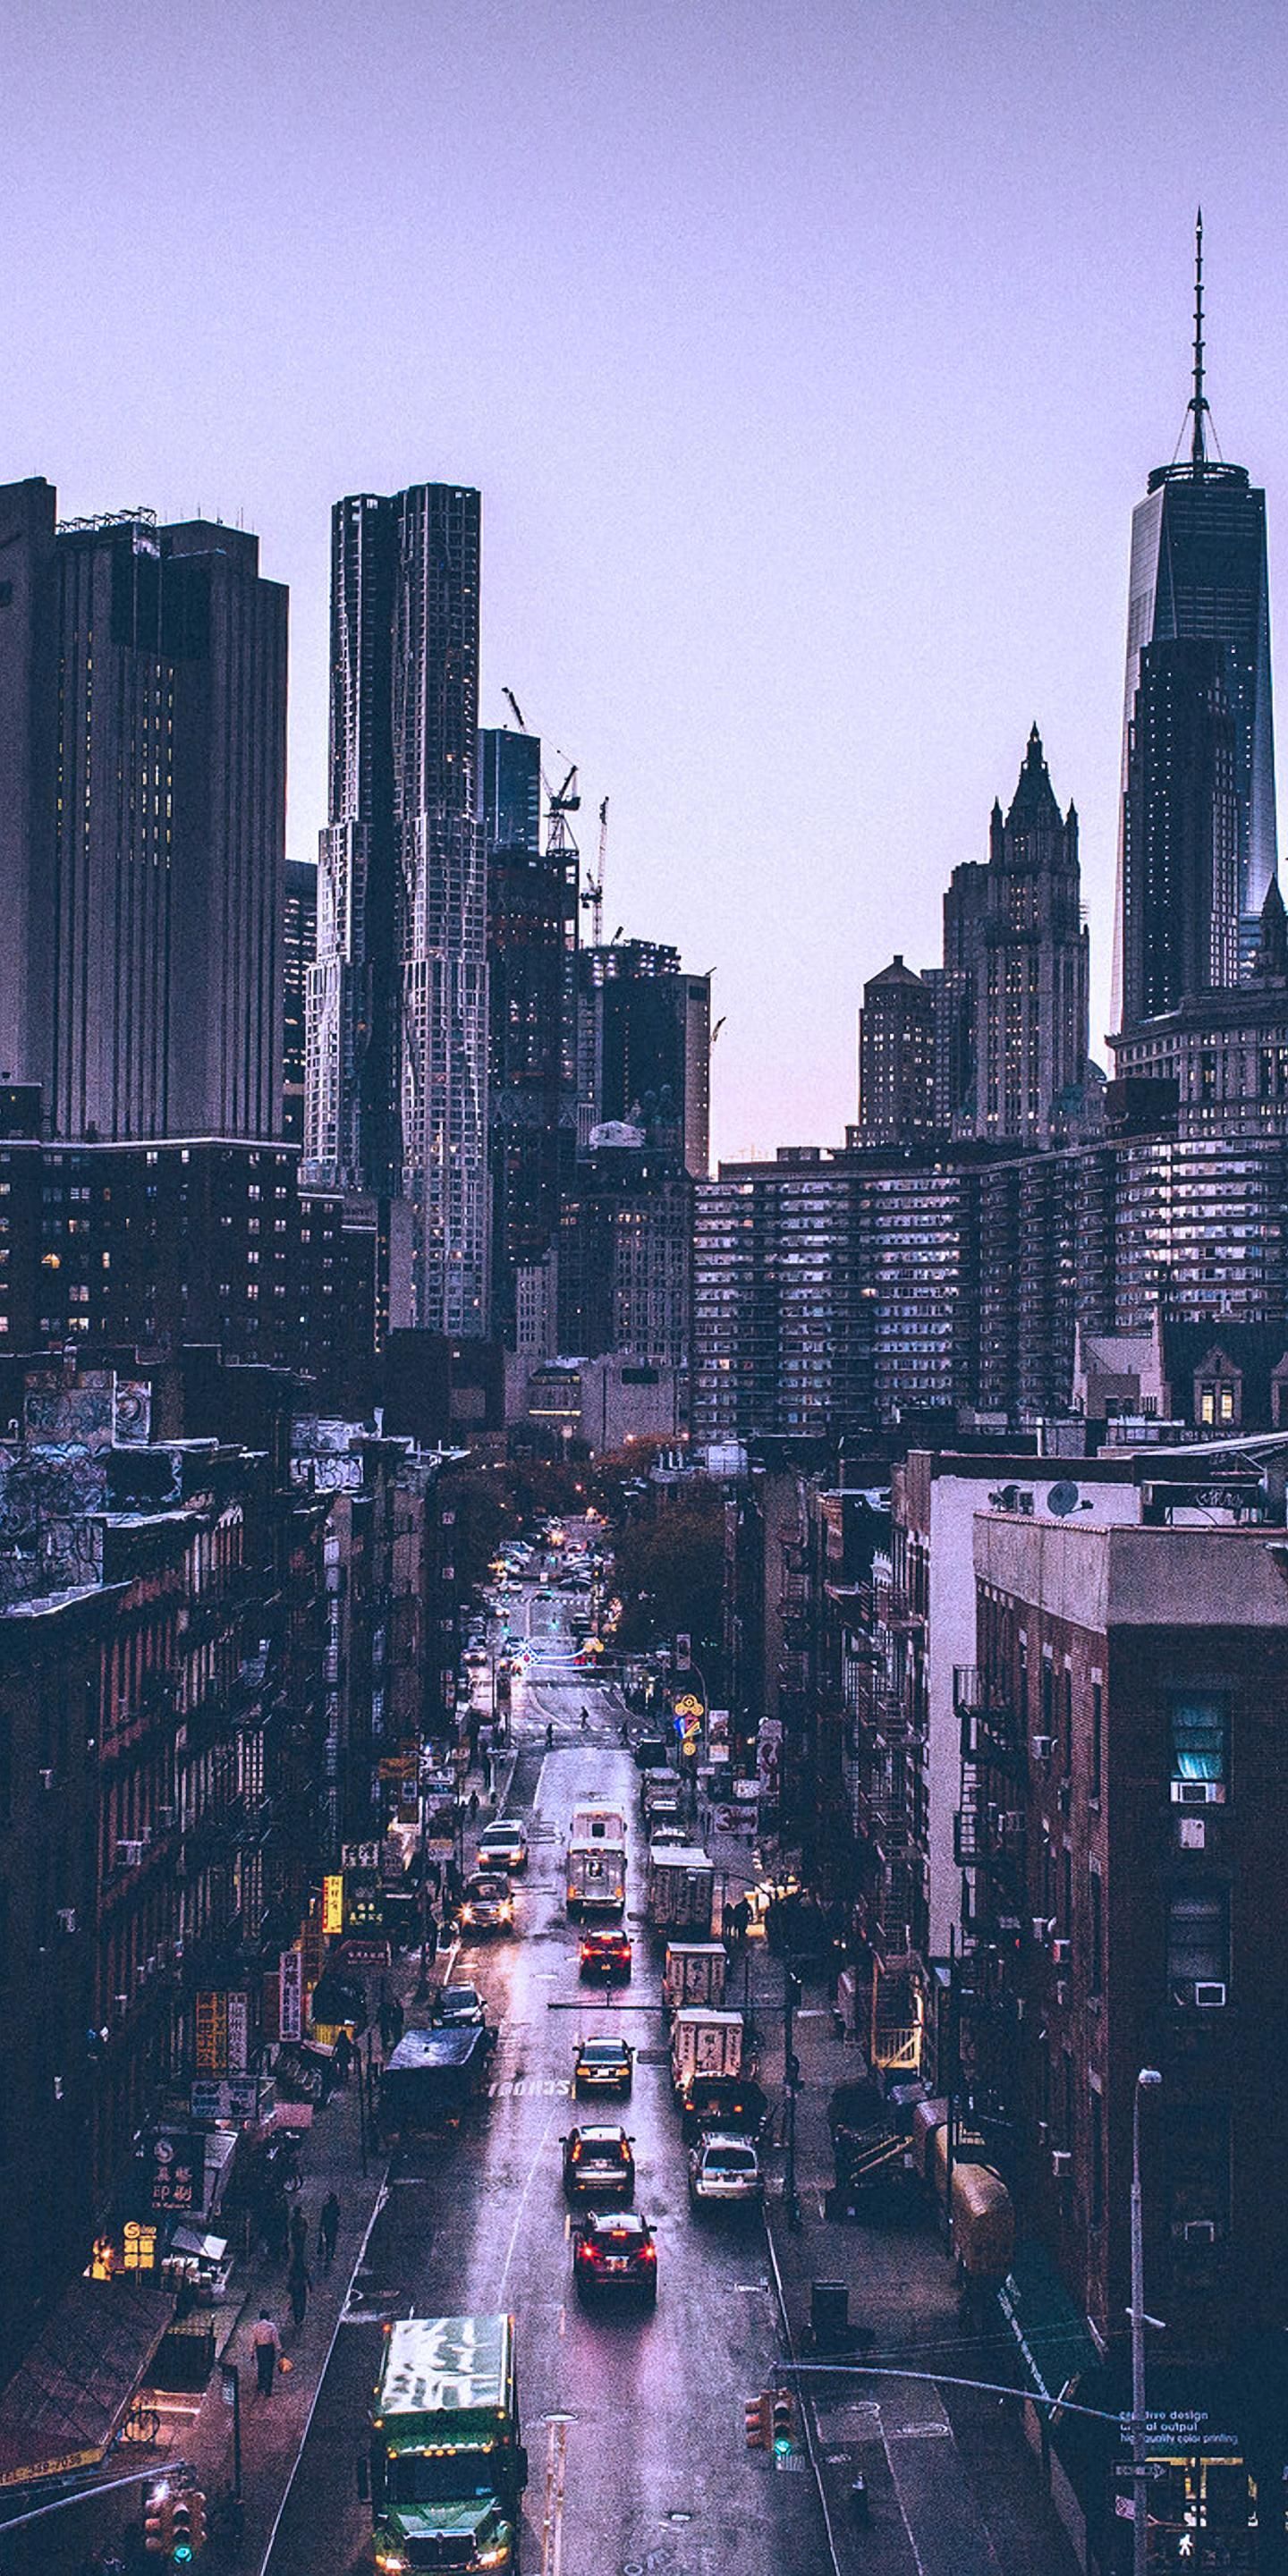 A city street with tall buildings and traffic - New York, city